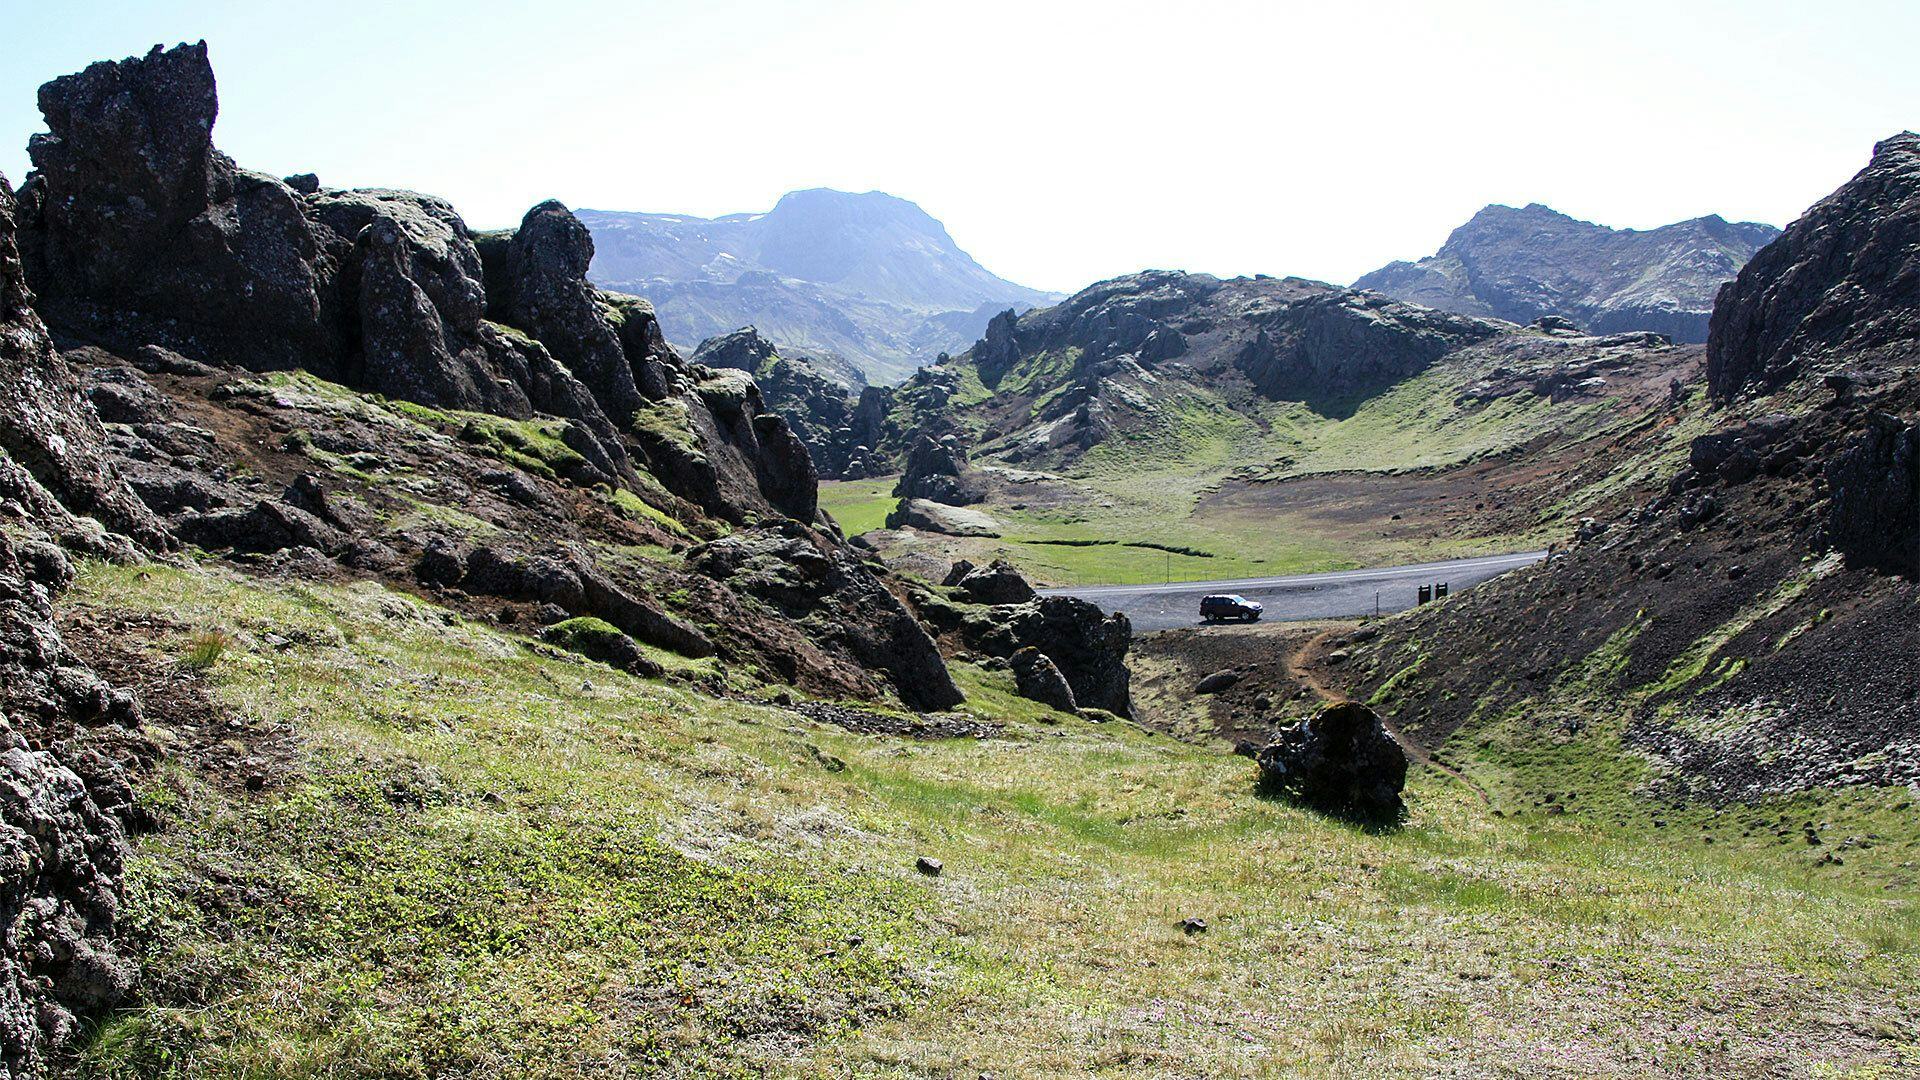 A rugged landscape with grassy area and dark rocky formation